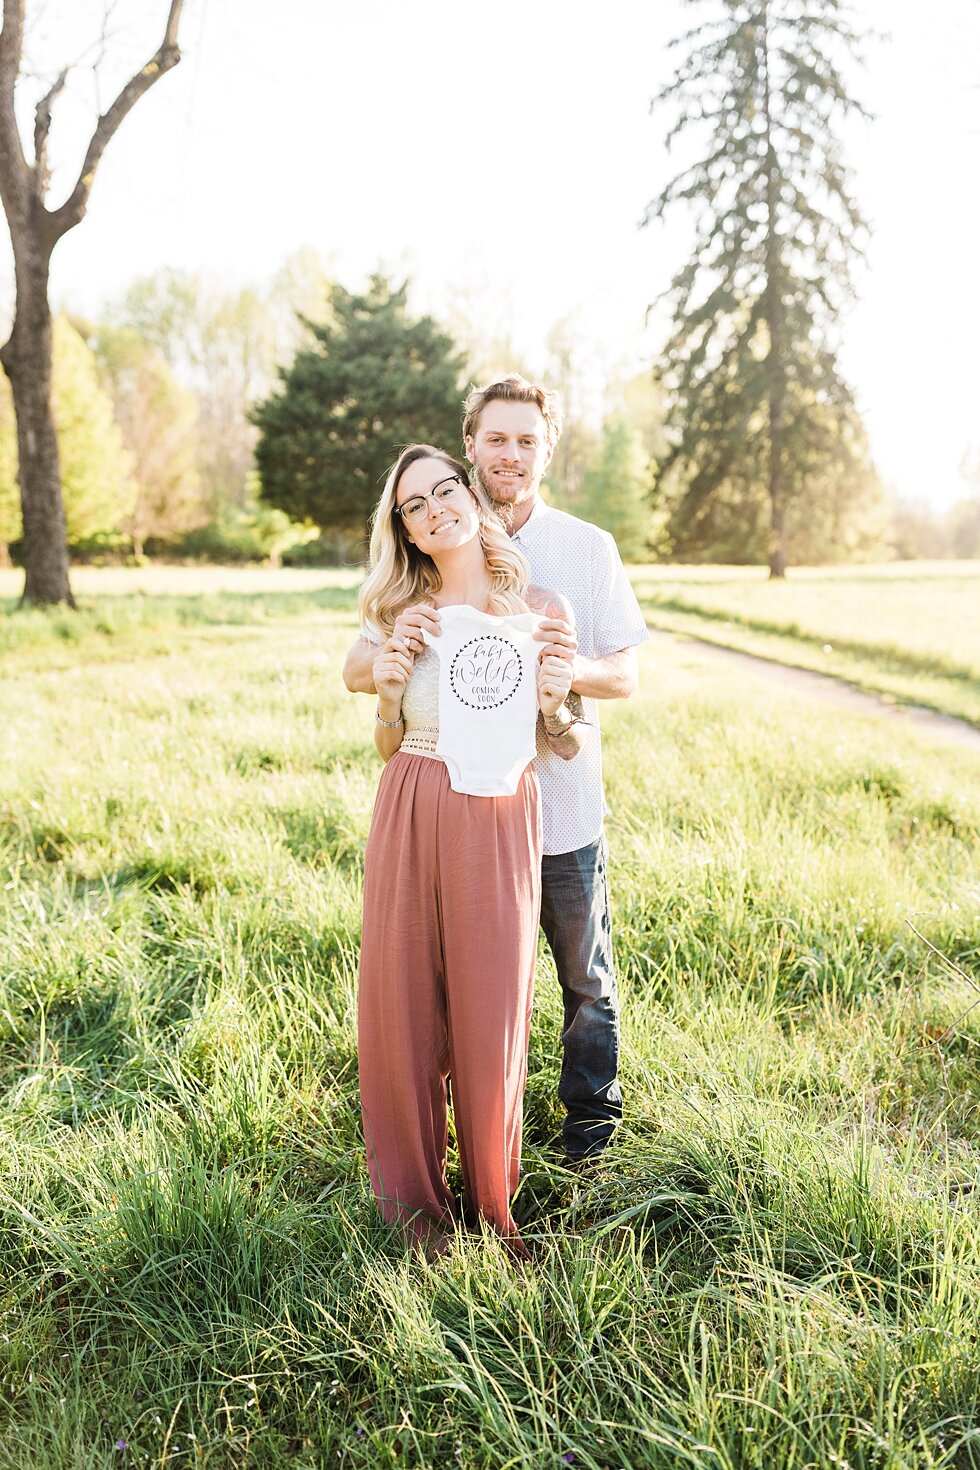  Onesie announcement that a new baby is on the way for this southern couple! announcement for a southern spring session. couple baby on the way expecting excited maternity photography congratulations announcement baby coming soon #padbl #padblmaterni